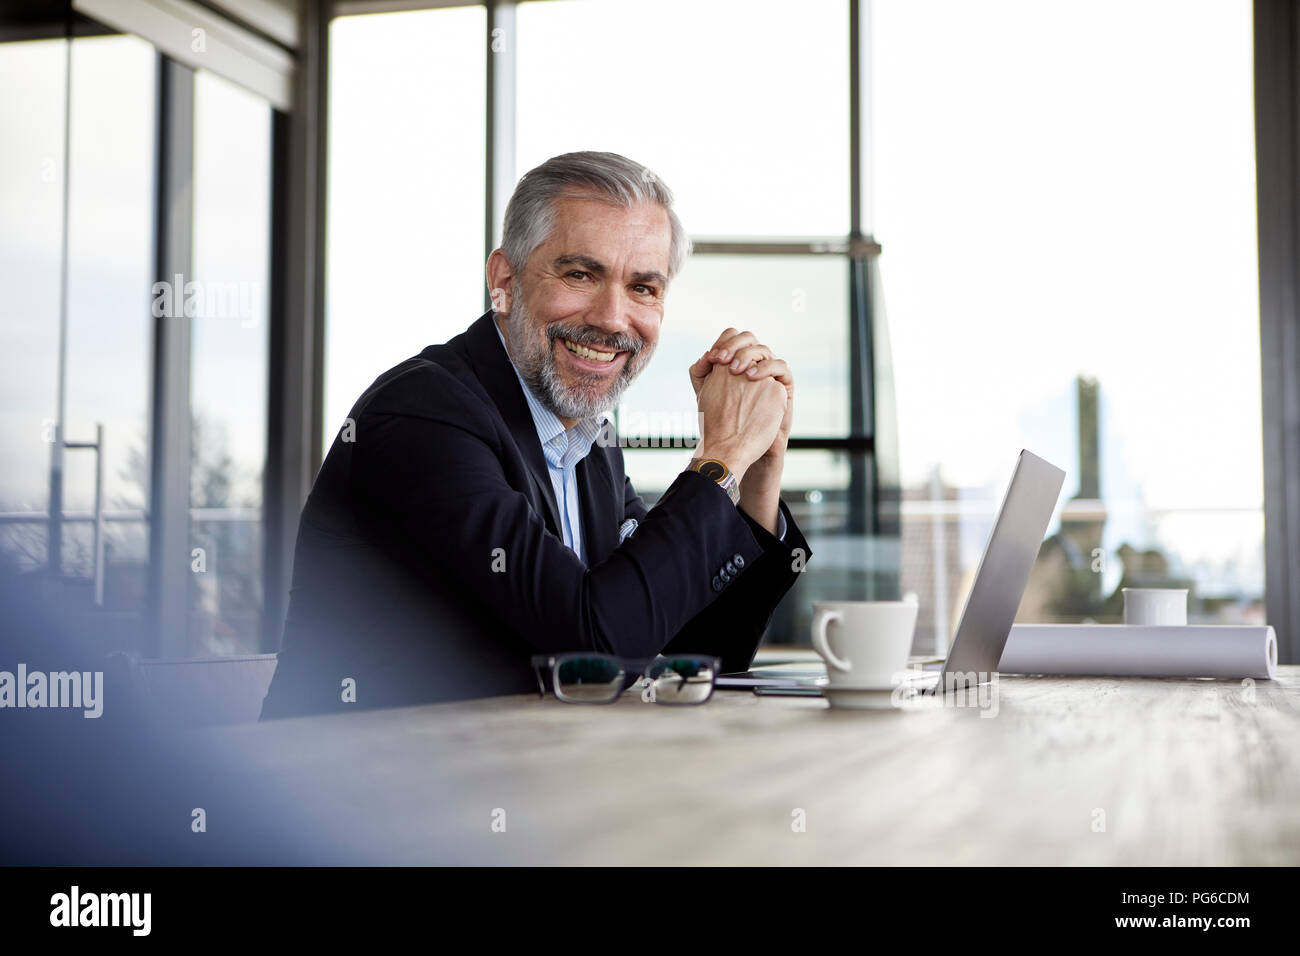 Portrait of smiling businessman with laptop at desk in office Stock Photo